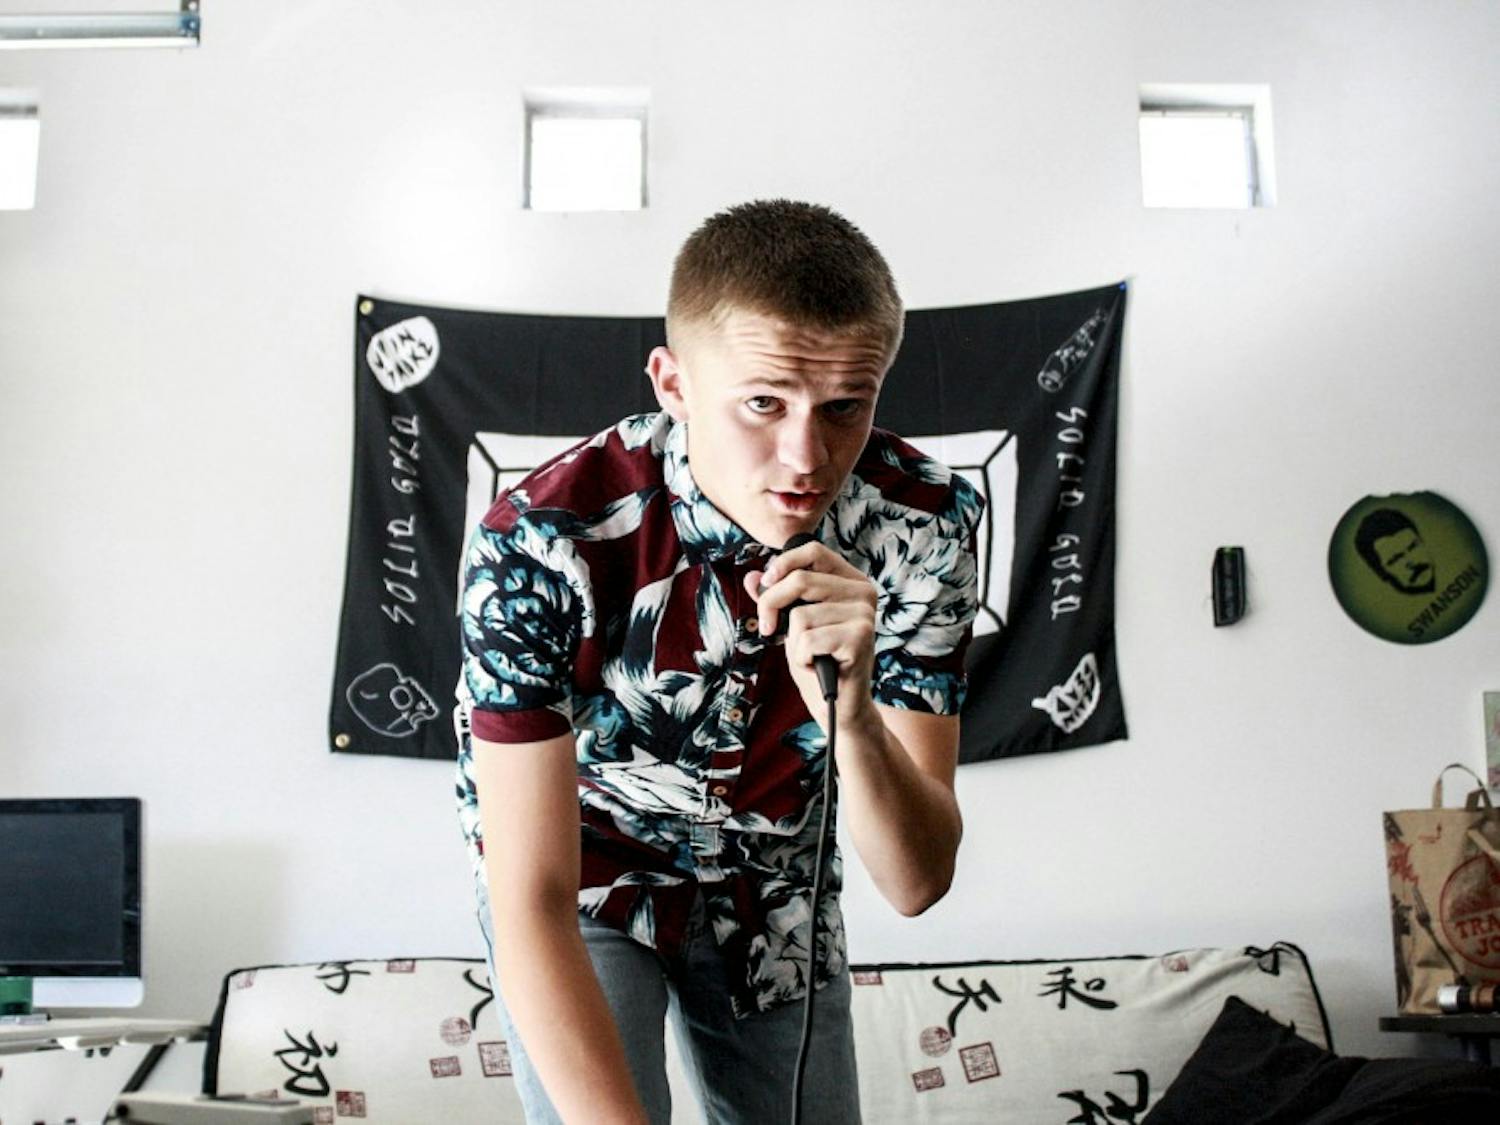 Young rap artist Matthew “Vez” Chavez performs some of his rap lyrics during an interview on Aug. 18, 2017. Vez is a seventeen year old currently beginning his senior year of high school at Rio Rancho High School.